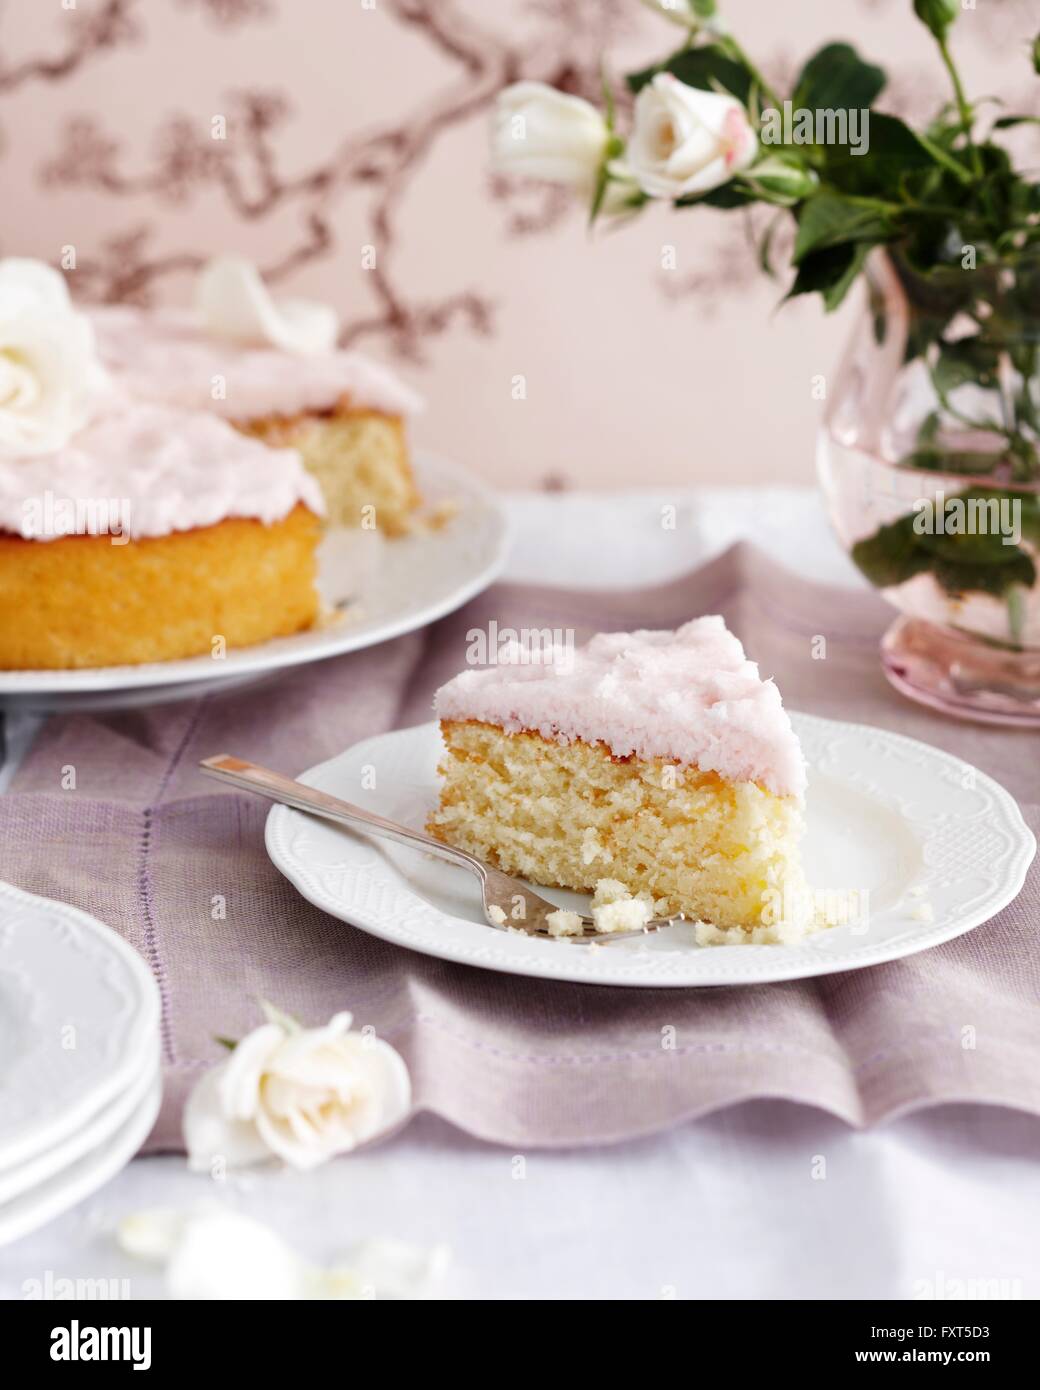 Coconut cake on traditional tea table Stock Photo